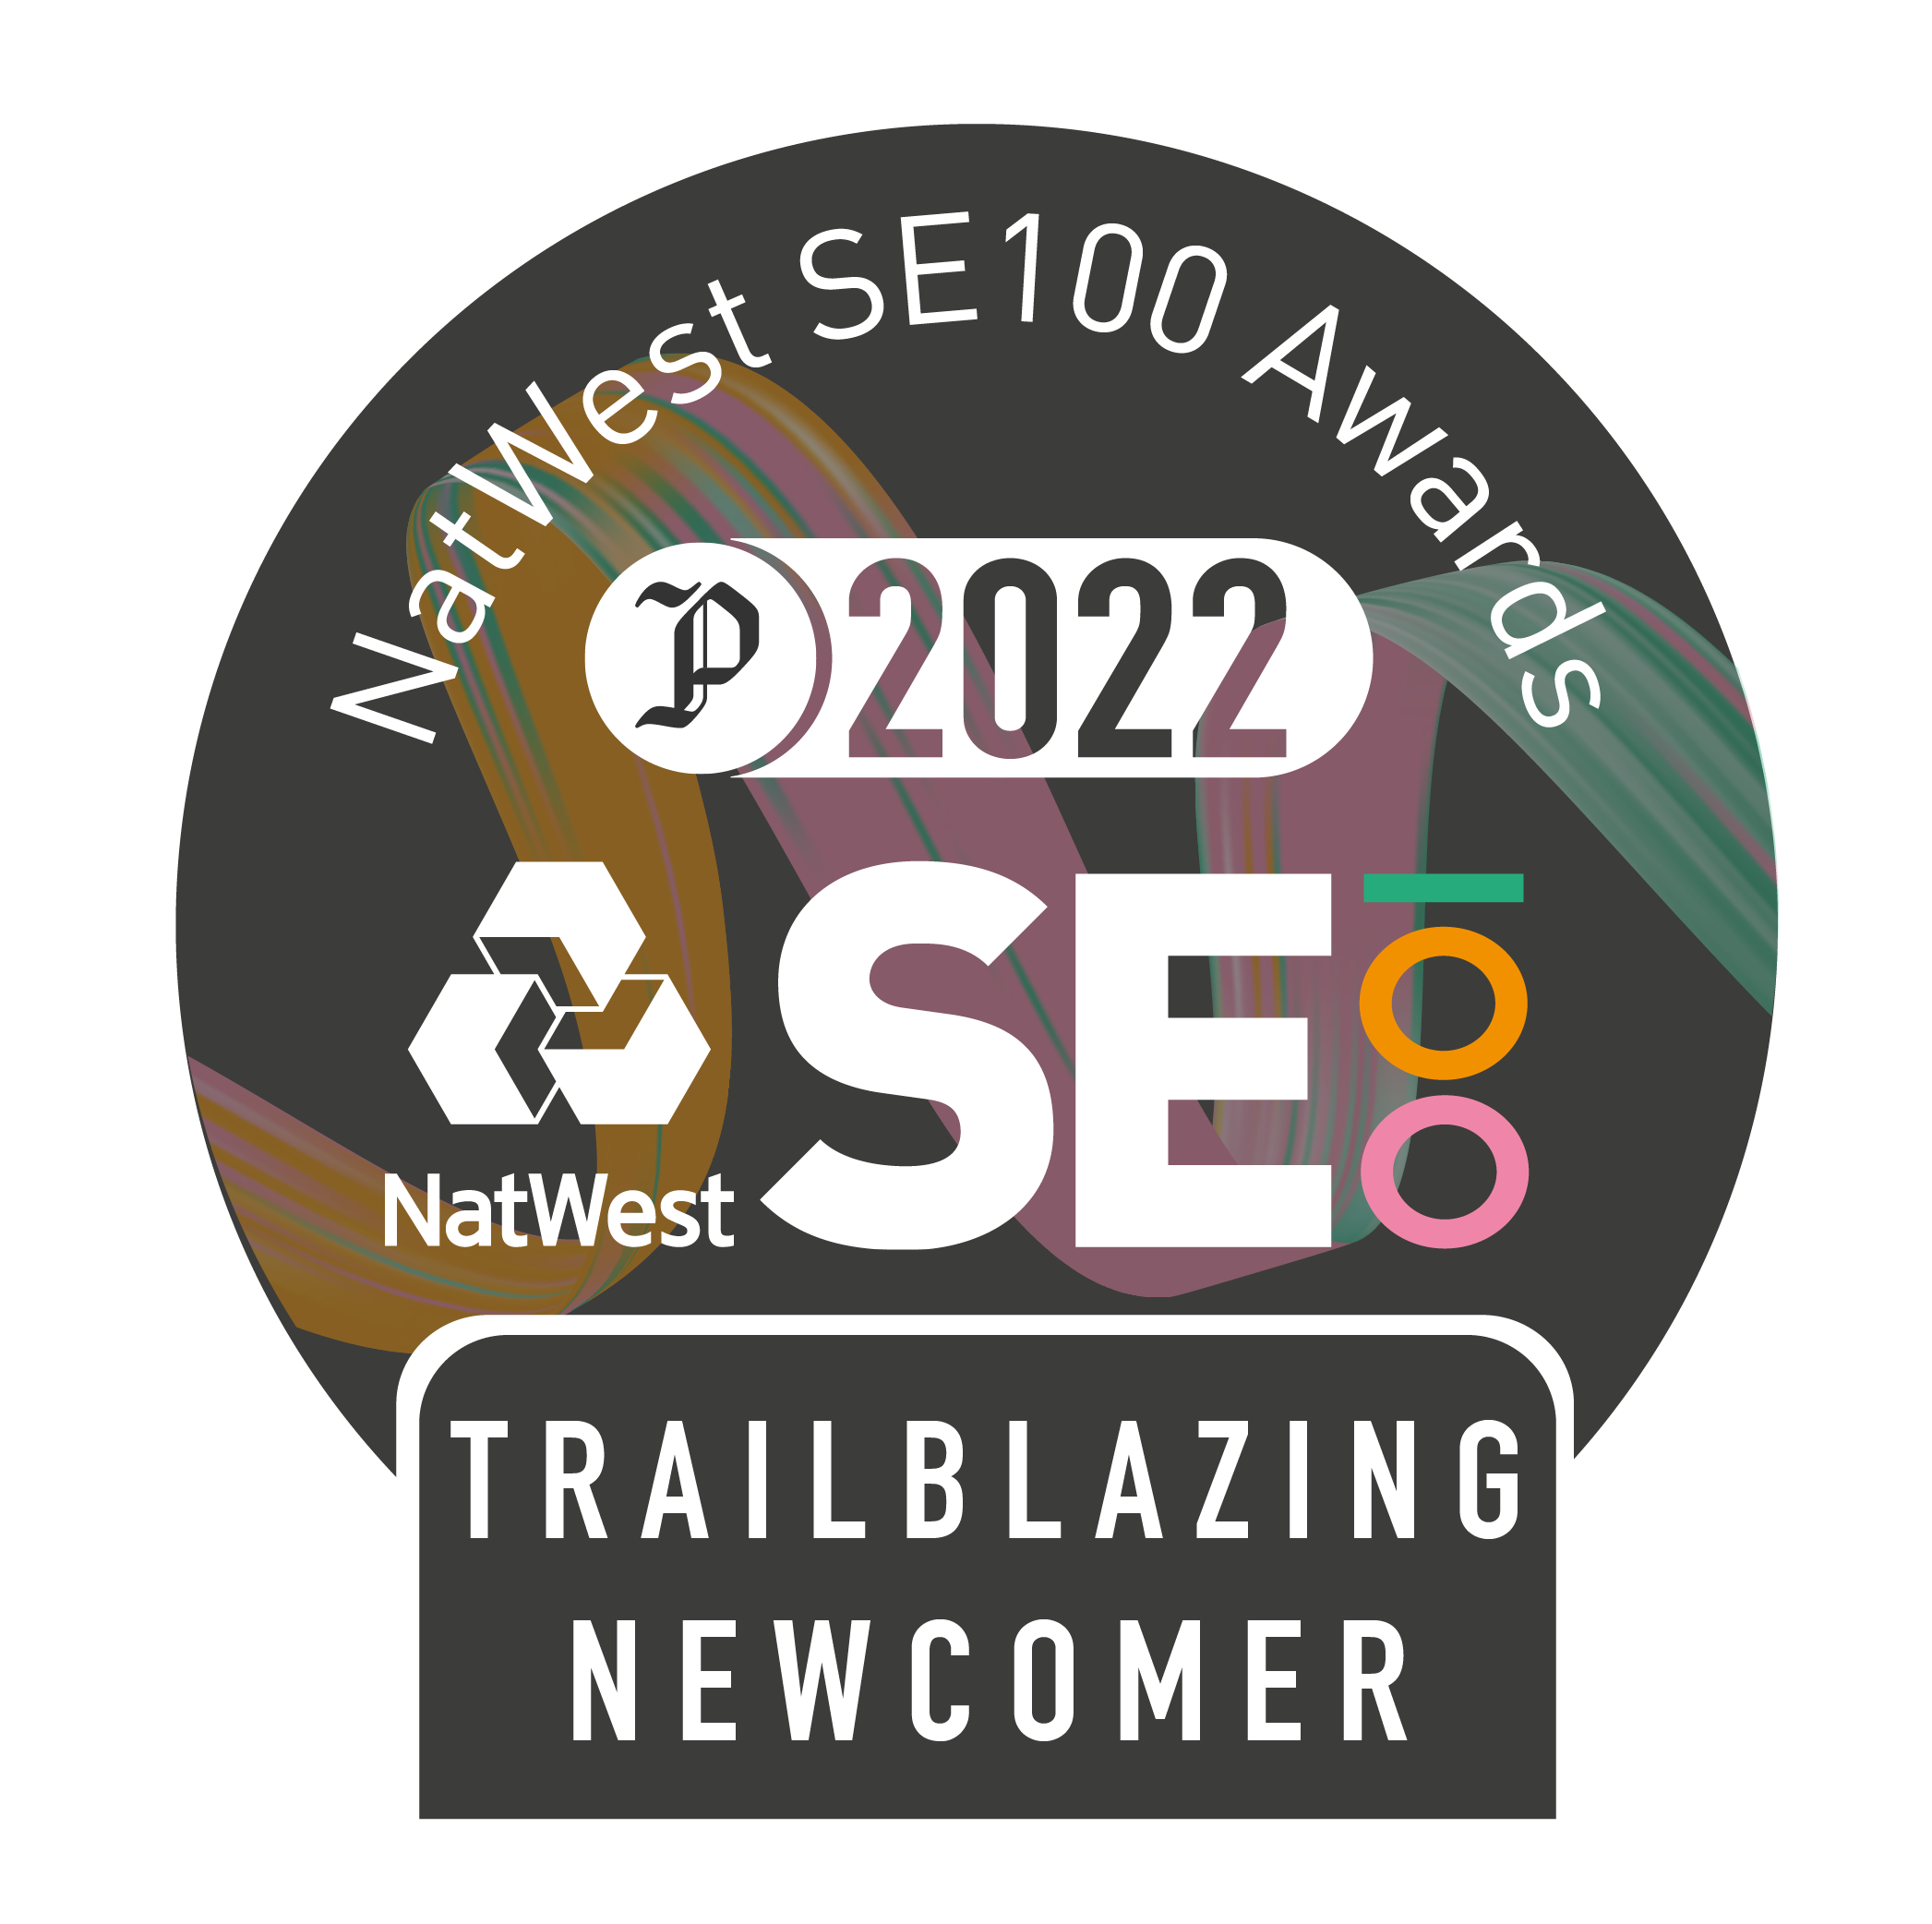 SE100_Badge_2022-TRAIL-NEW.png